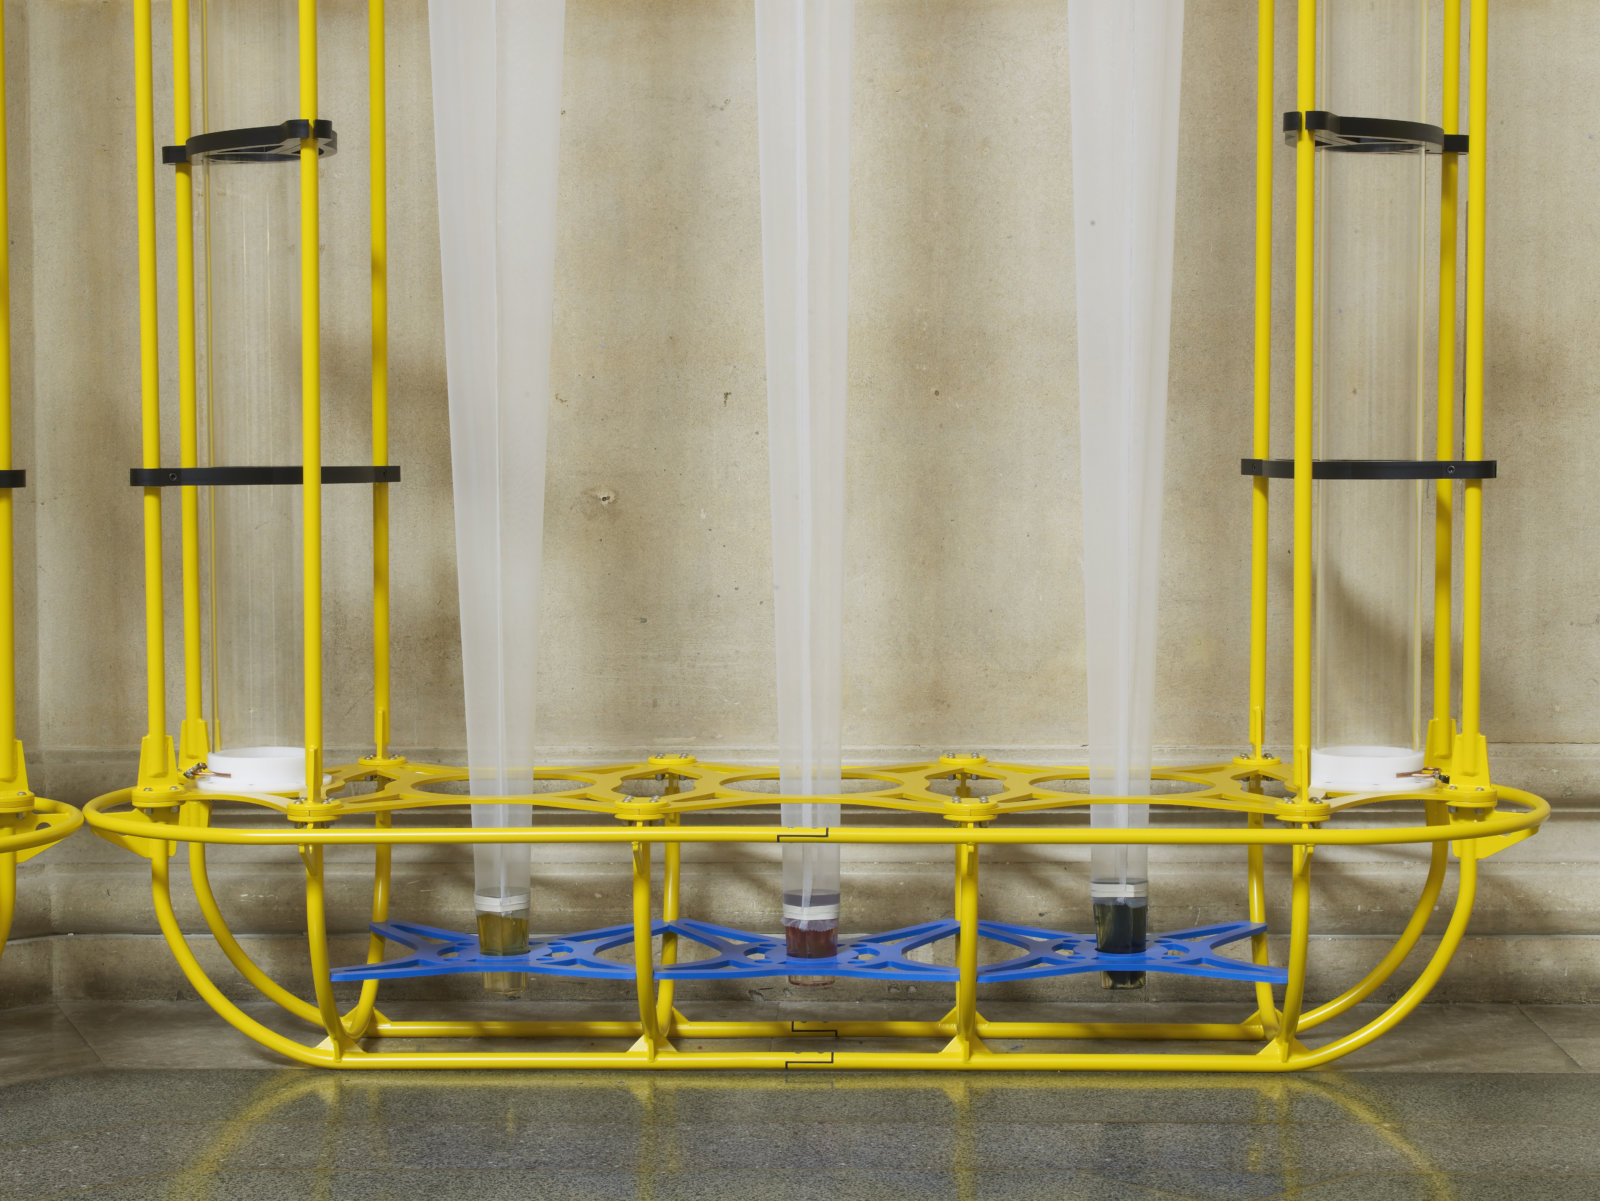 Christina Mackie, The Yellow Machines (detail), 2015, steel, aluminum, acrylic, styrene, copper, stainless steel, nylon webbing, polyethylene, nylon, resin, rubber, 128 x 160 x 32 in. (326 x 406 x 80 cm). Installation view, the filters, Tate Britain, London, UK, 2015